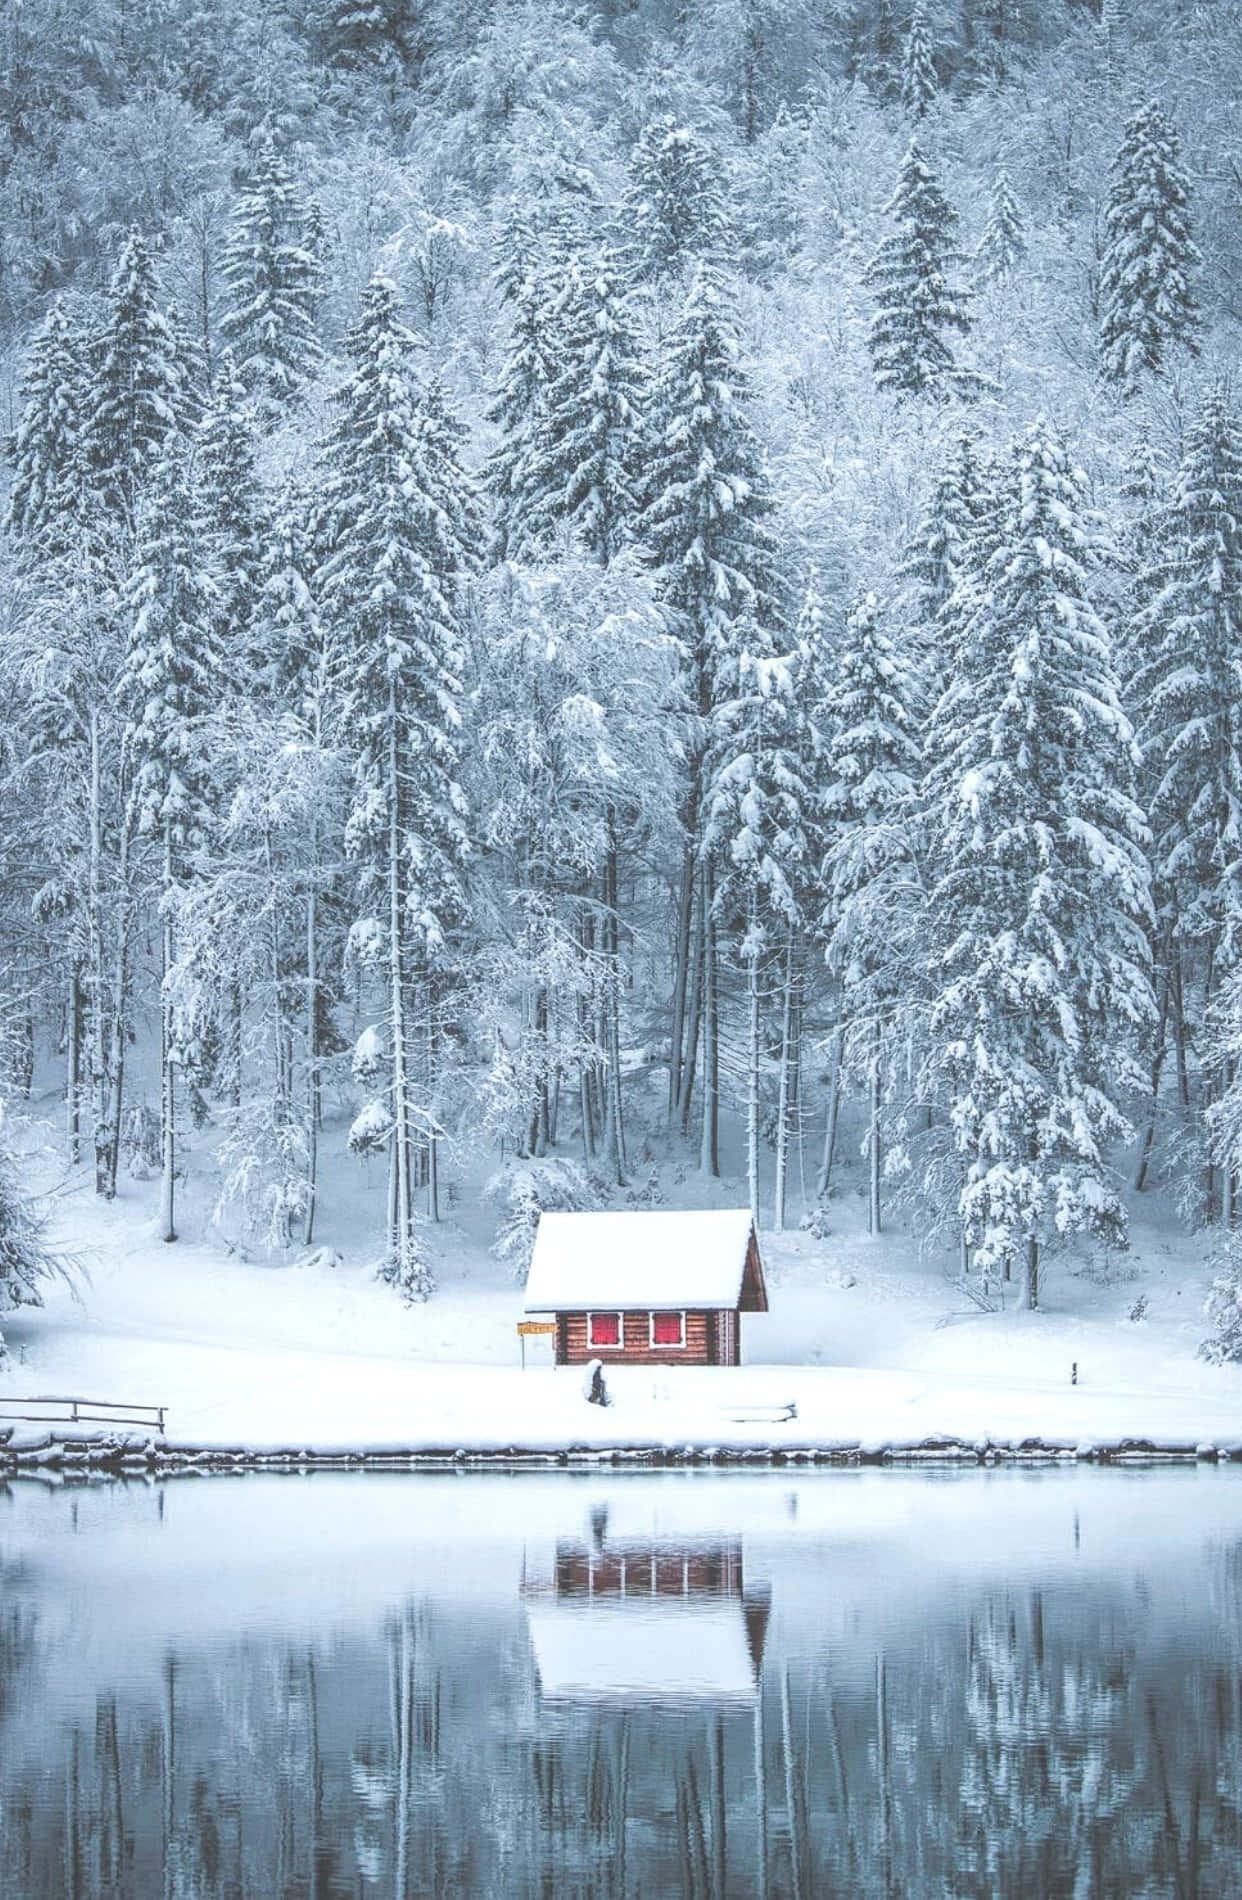 Warm and Charming Cozy Winter Cabin Nestled in Snowy Forest Wallpaper